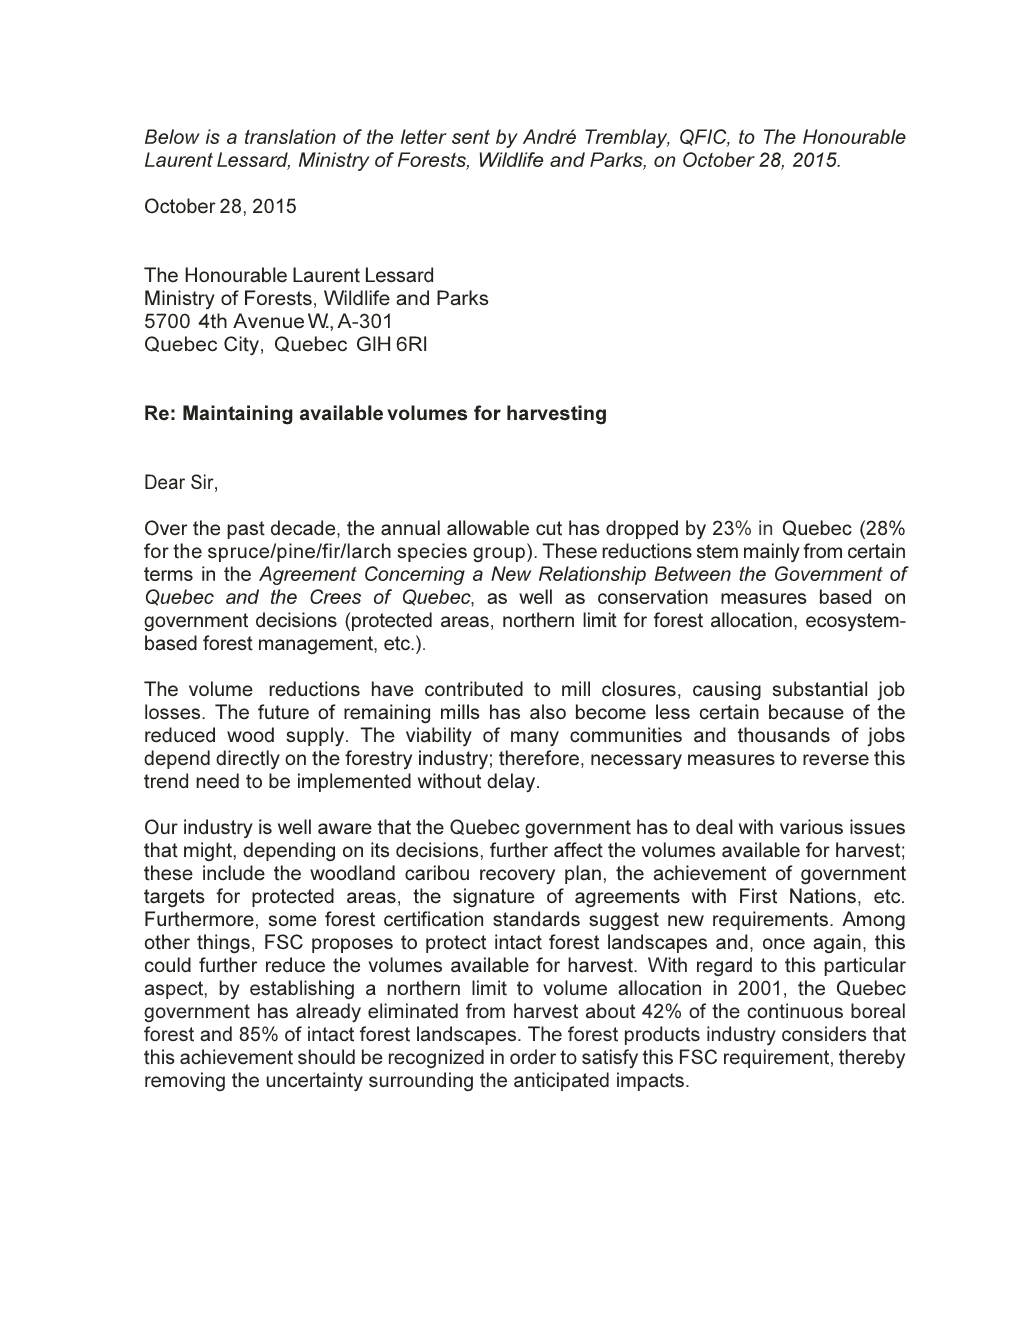 Below Is a Translation of the Letter Sent by André Tremblay, QFIC, to the Honourable Laurent Lessard, Ministry of Forests, Wildlife and Parks, on October 28, 2015